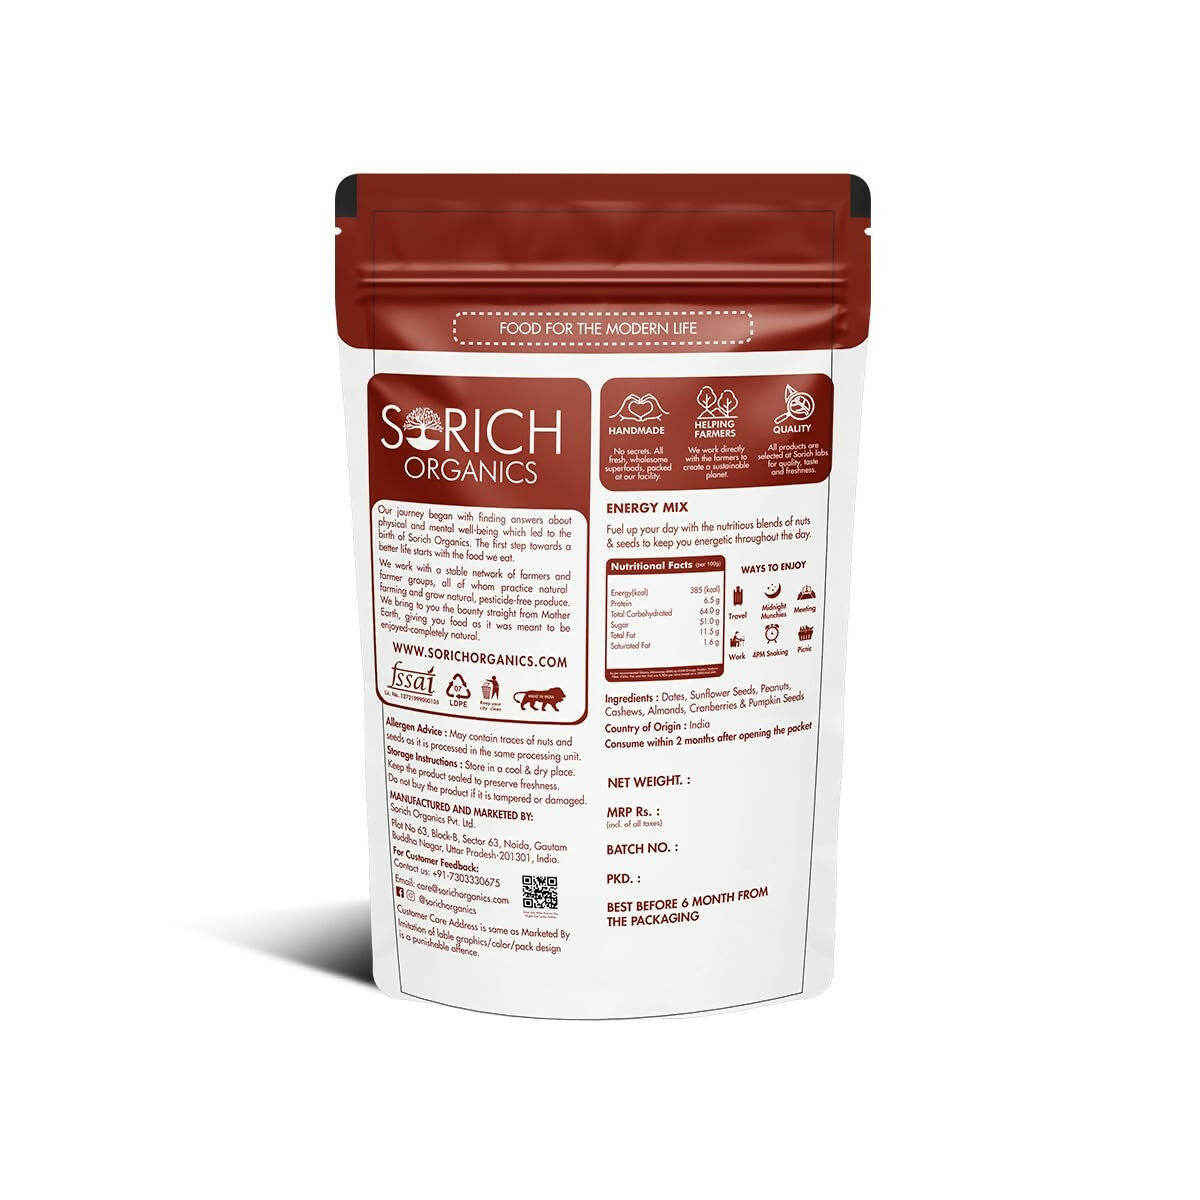 Sorich Organics Energy Mix Dried Nuts and Berries